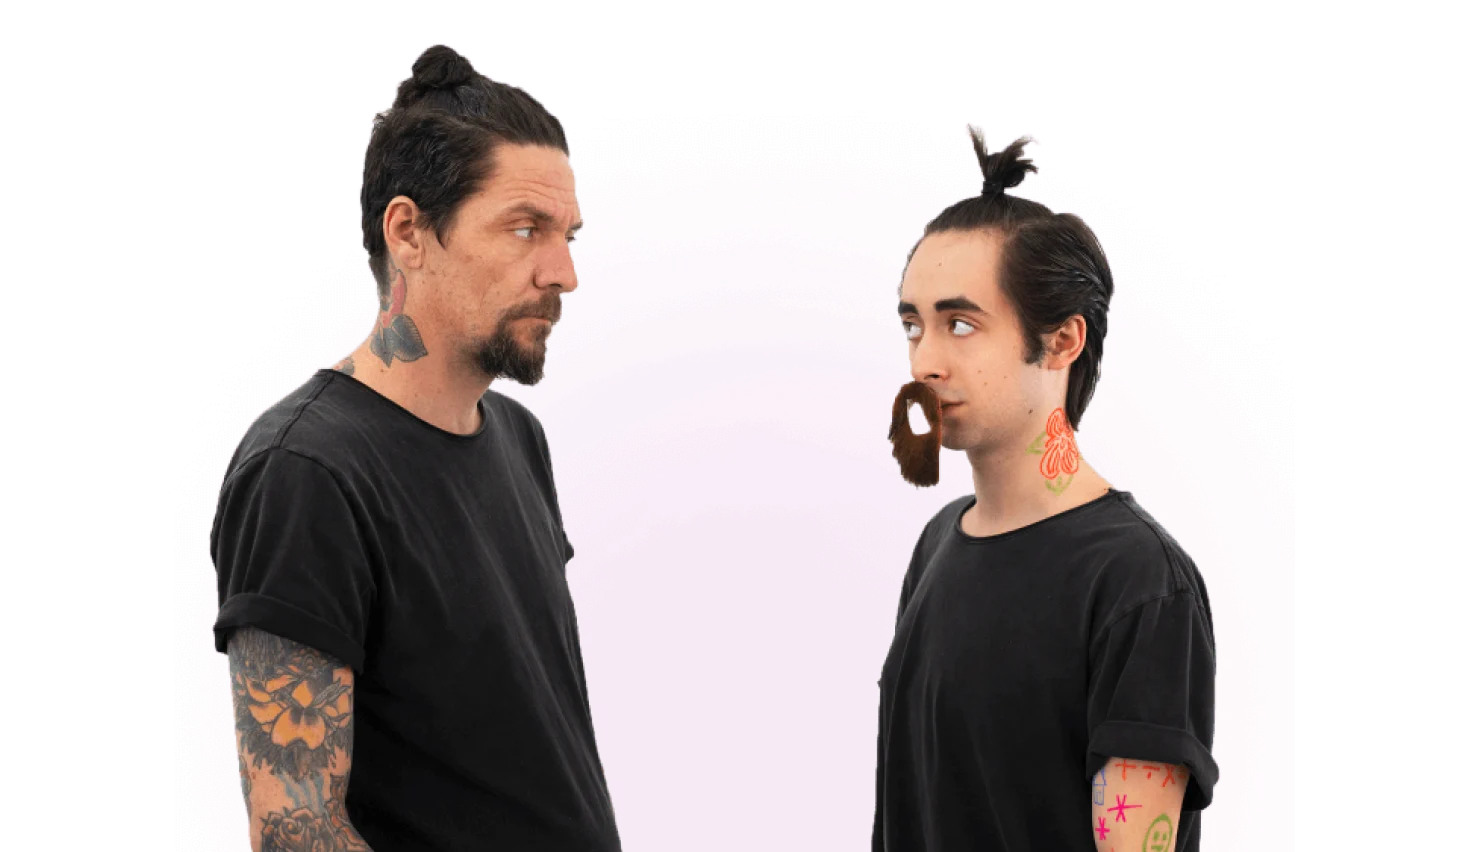 A man with a goatee, man bun, and tattoos on a black shirt stares at another person who is impersonating him by having the same tattoos, hairstyle, and t-shirt.